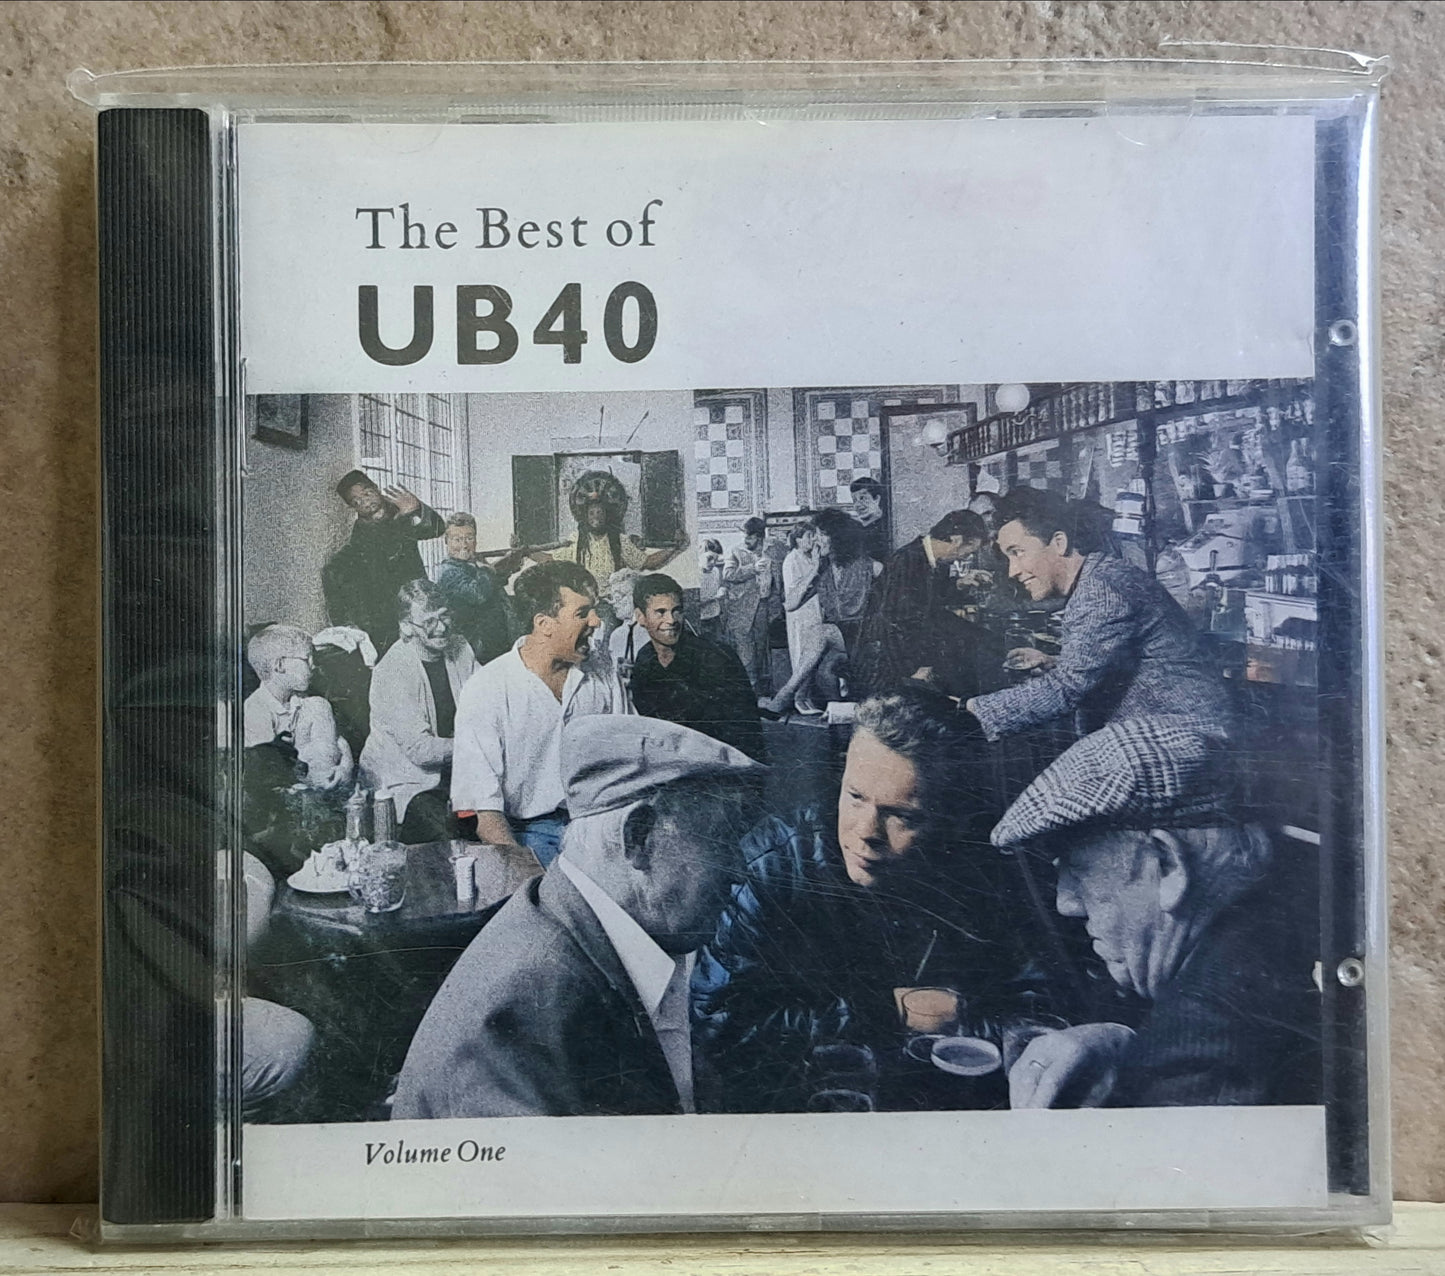 UB40 - The best of (cd)